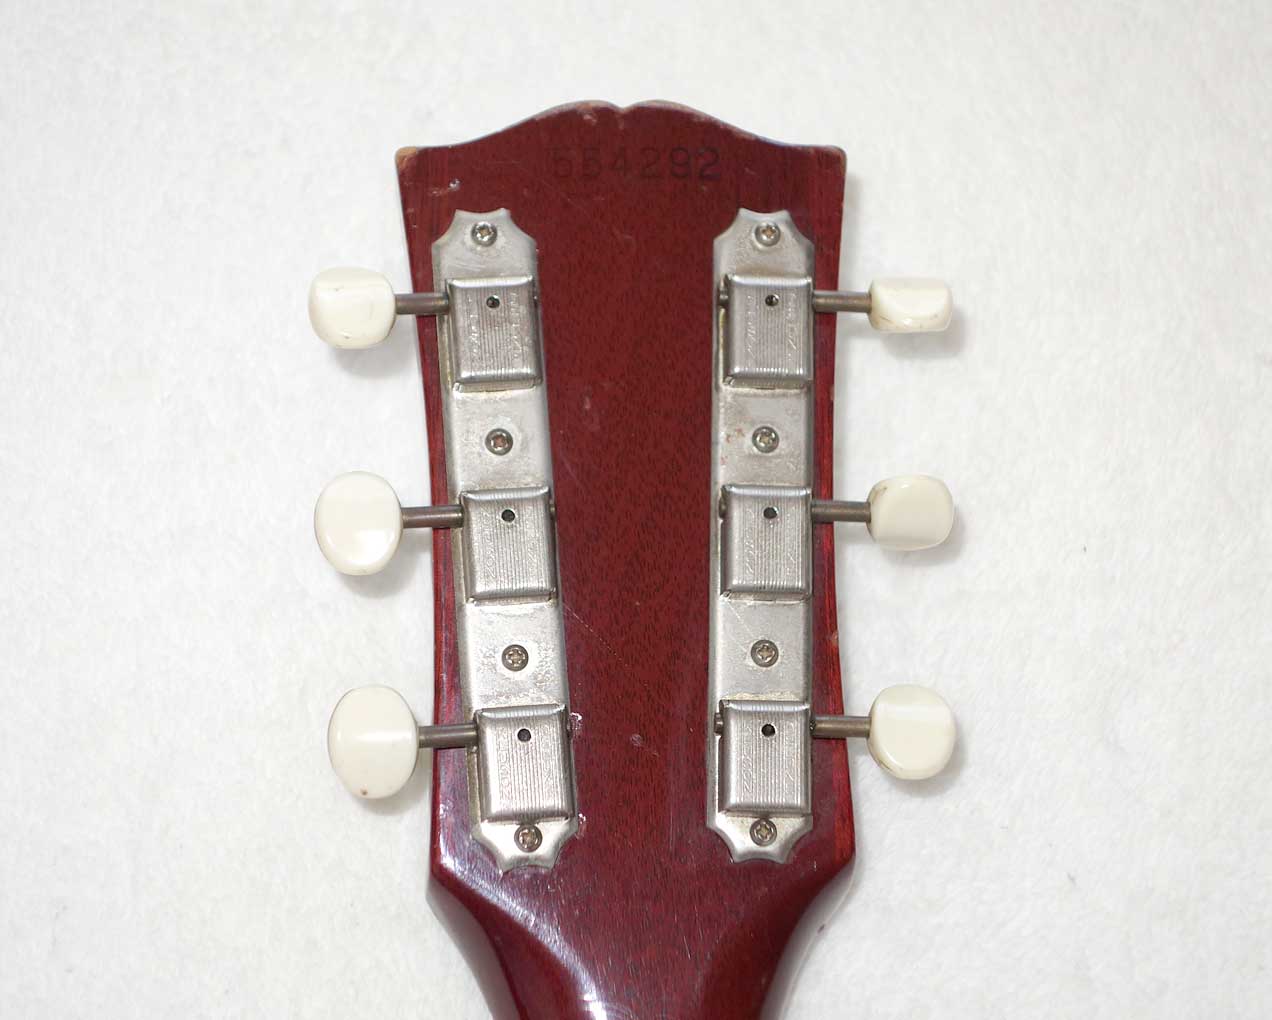 Vintage 1966 Gibson SG Junior, Cherry Red, All Original (except for output jack)